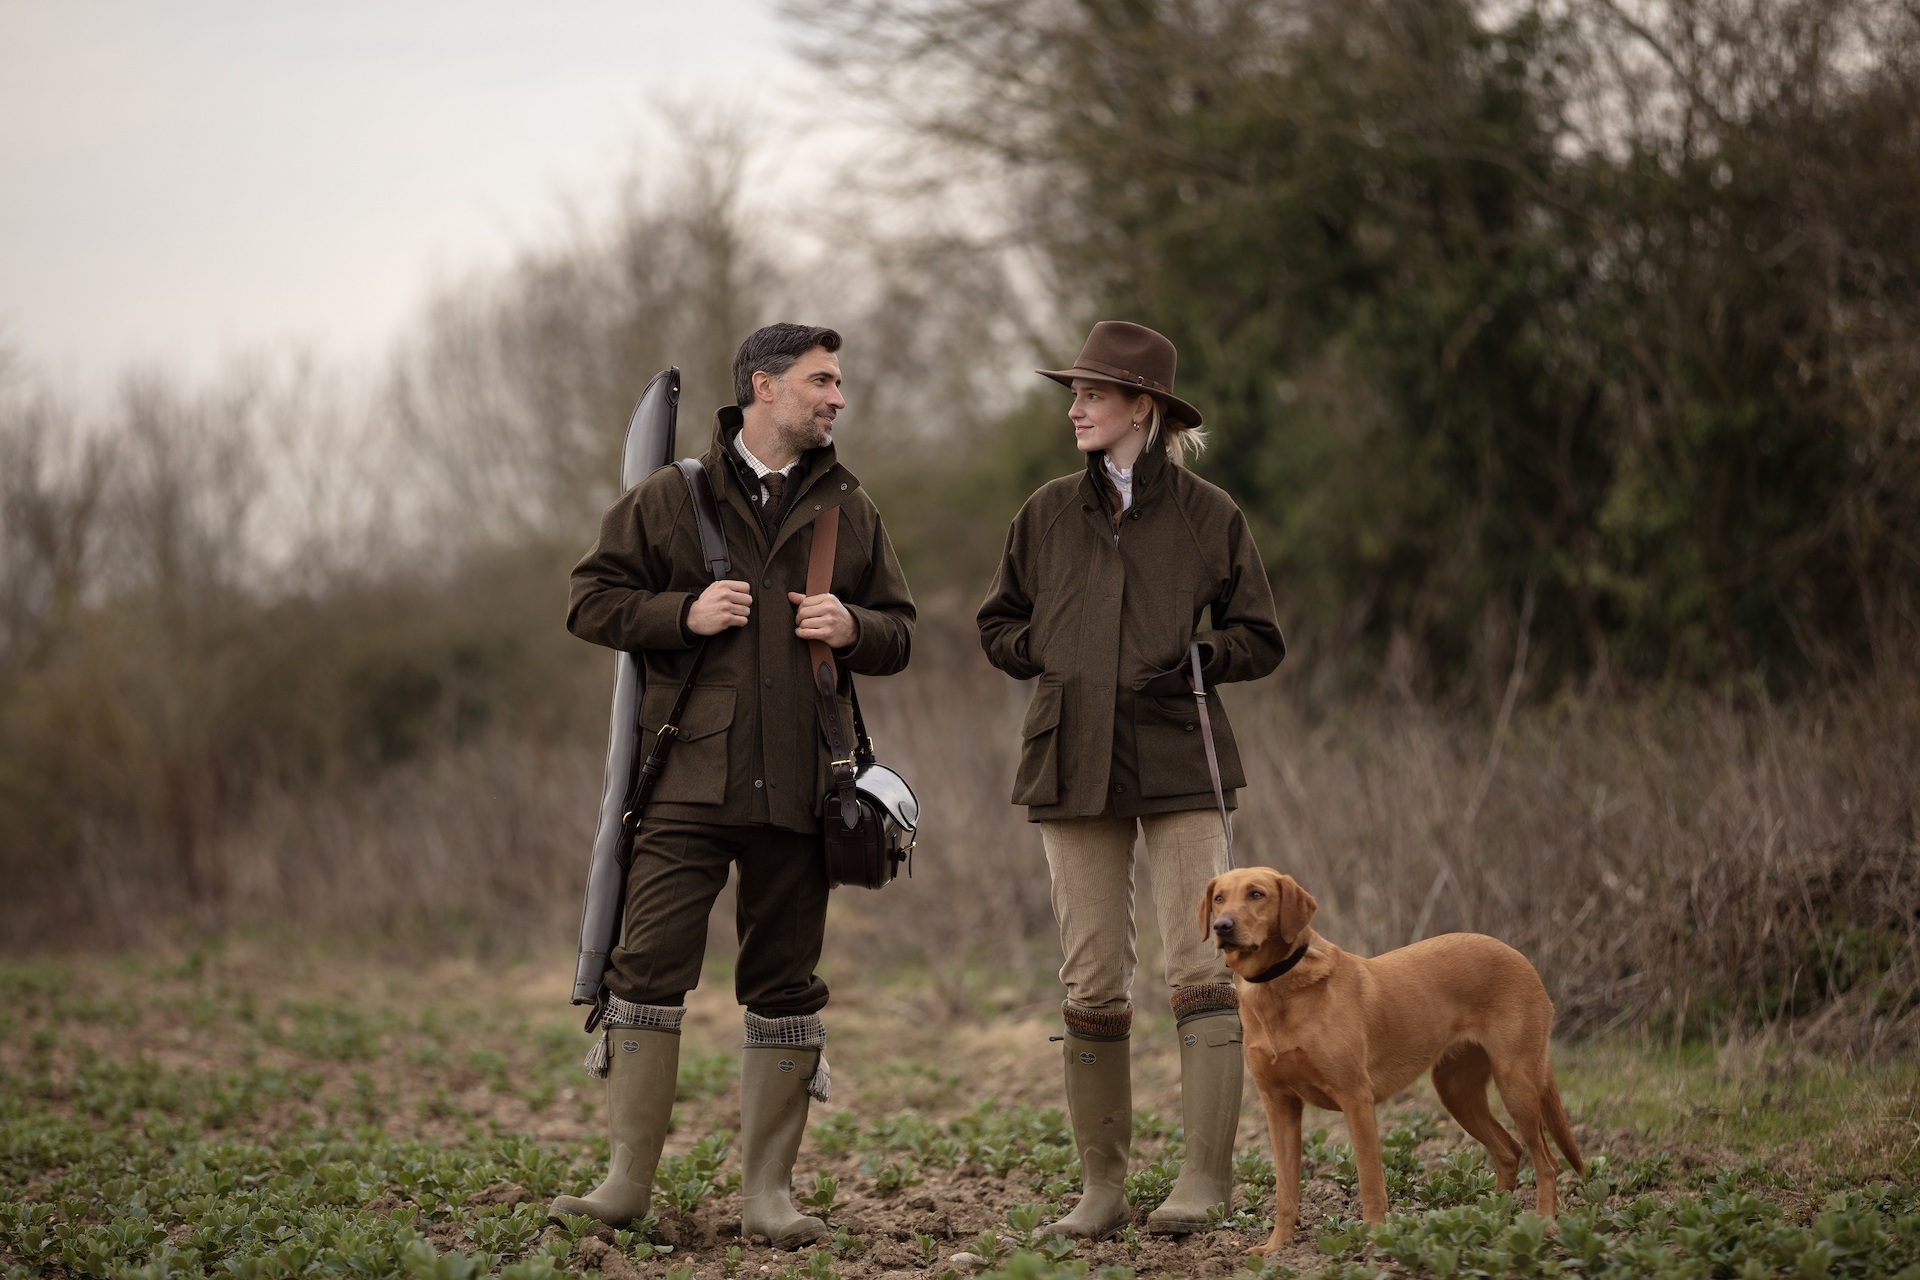 Farlows man woman and dog in field - British Sporting Brands